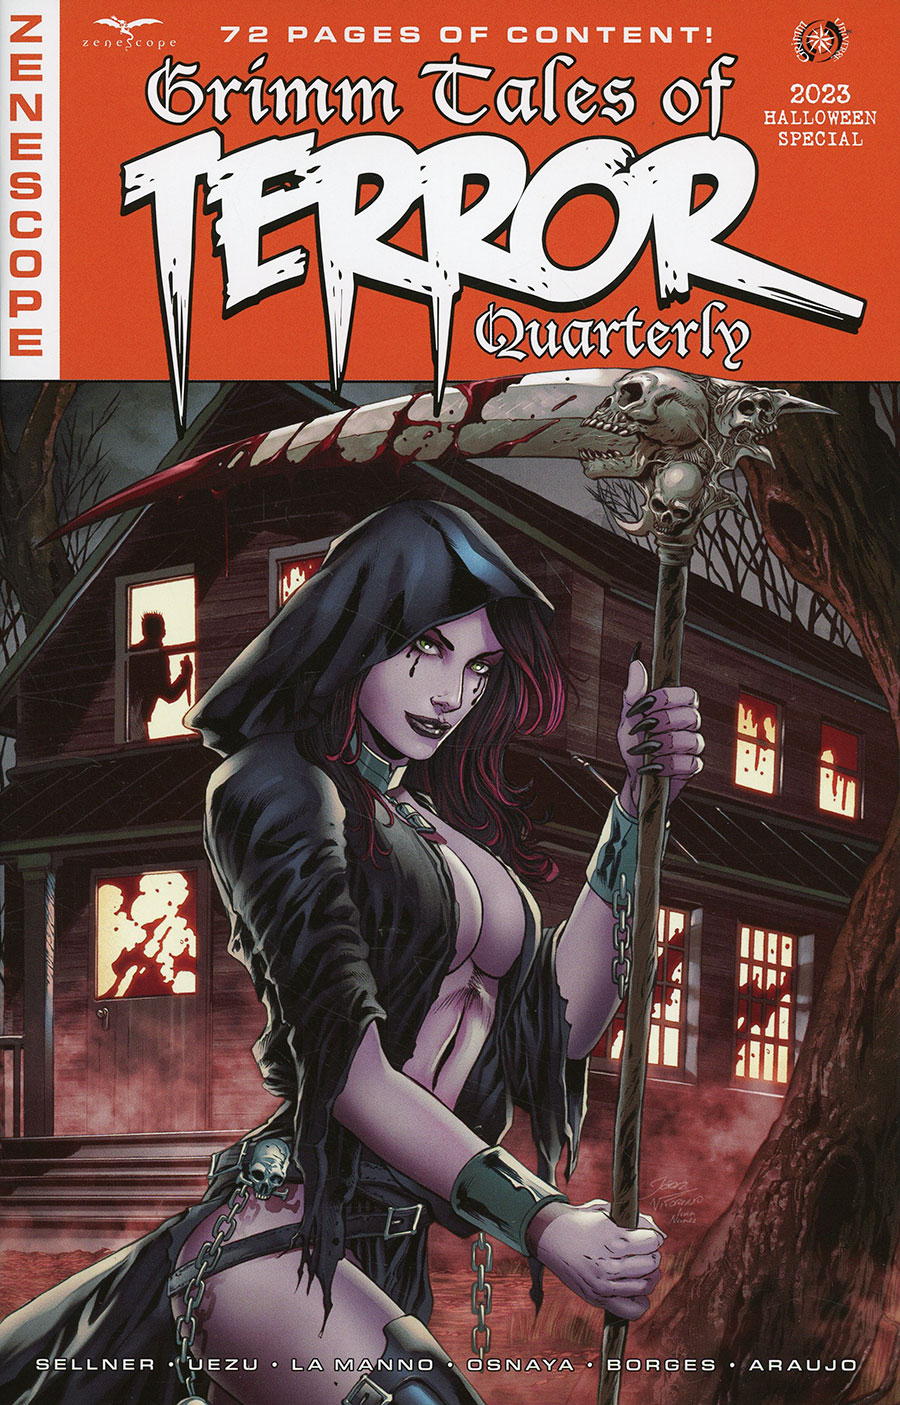 Grimm Fairy Tales Presents Grimm Tales Of Terror Quarterly #12 2023 Halloween Special Cover A Igor Vitorino